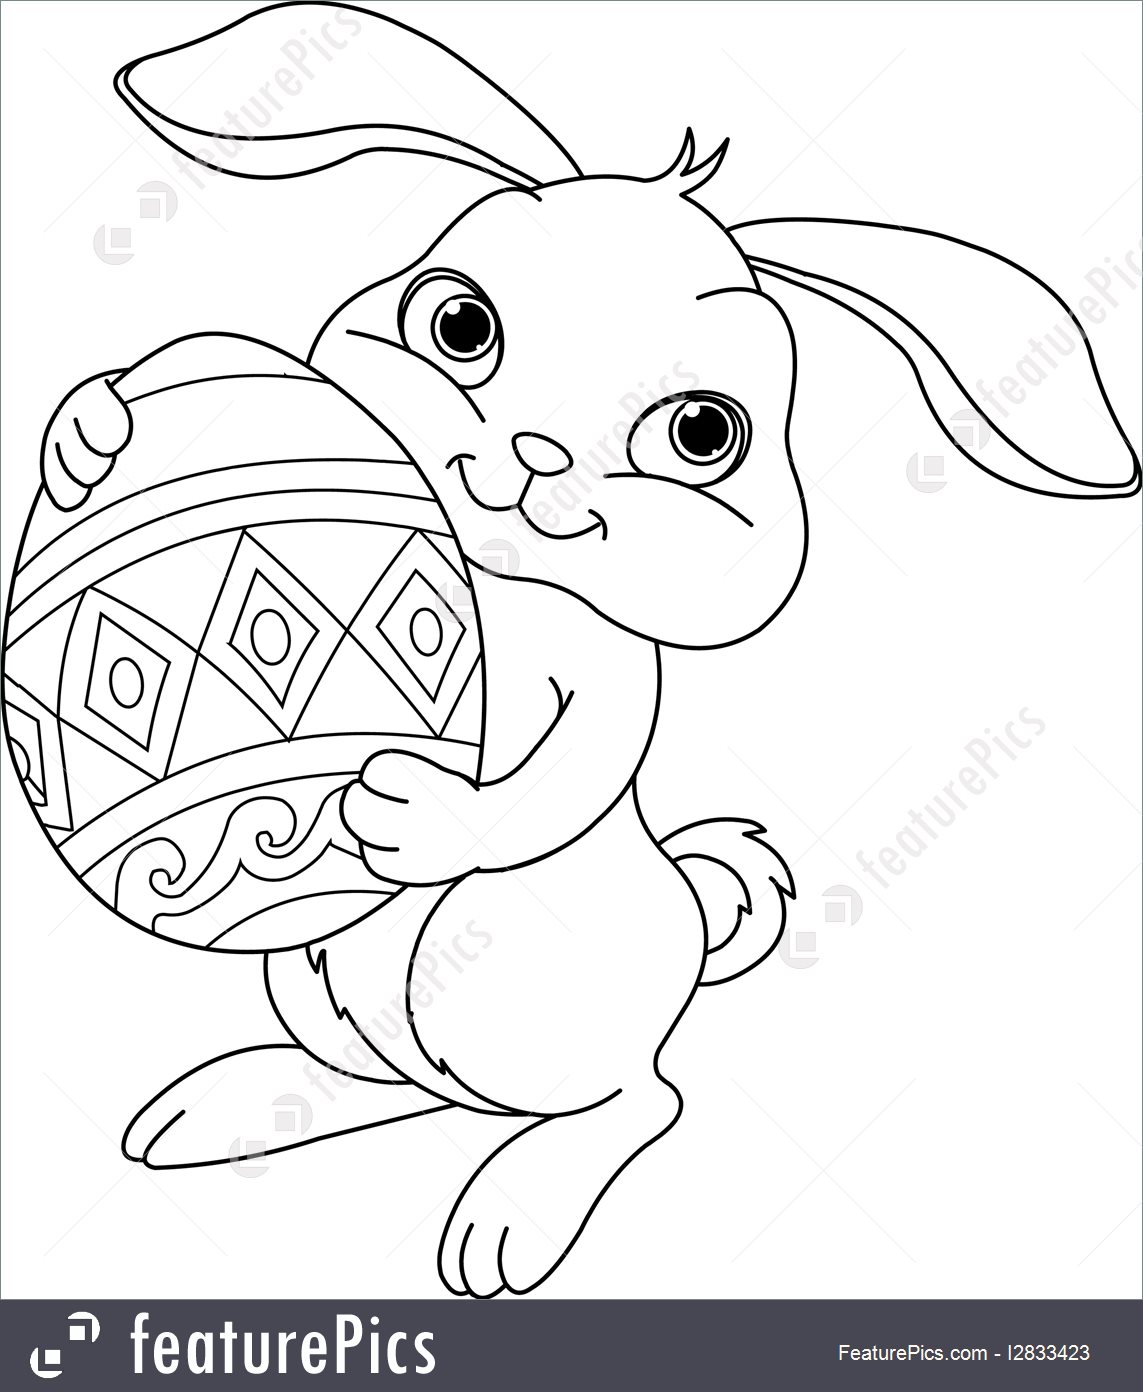 Bunny Head Coloring Pages at GetDrawings | Free download